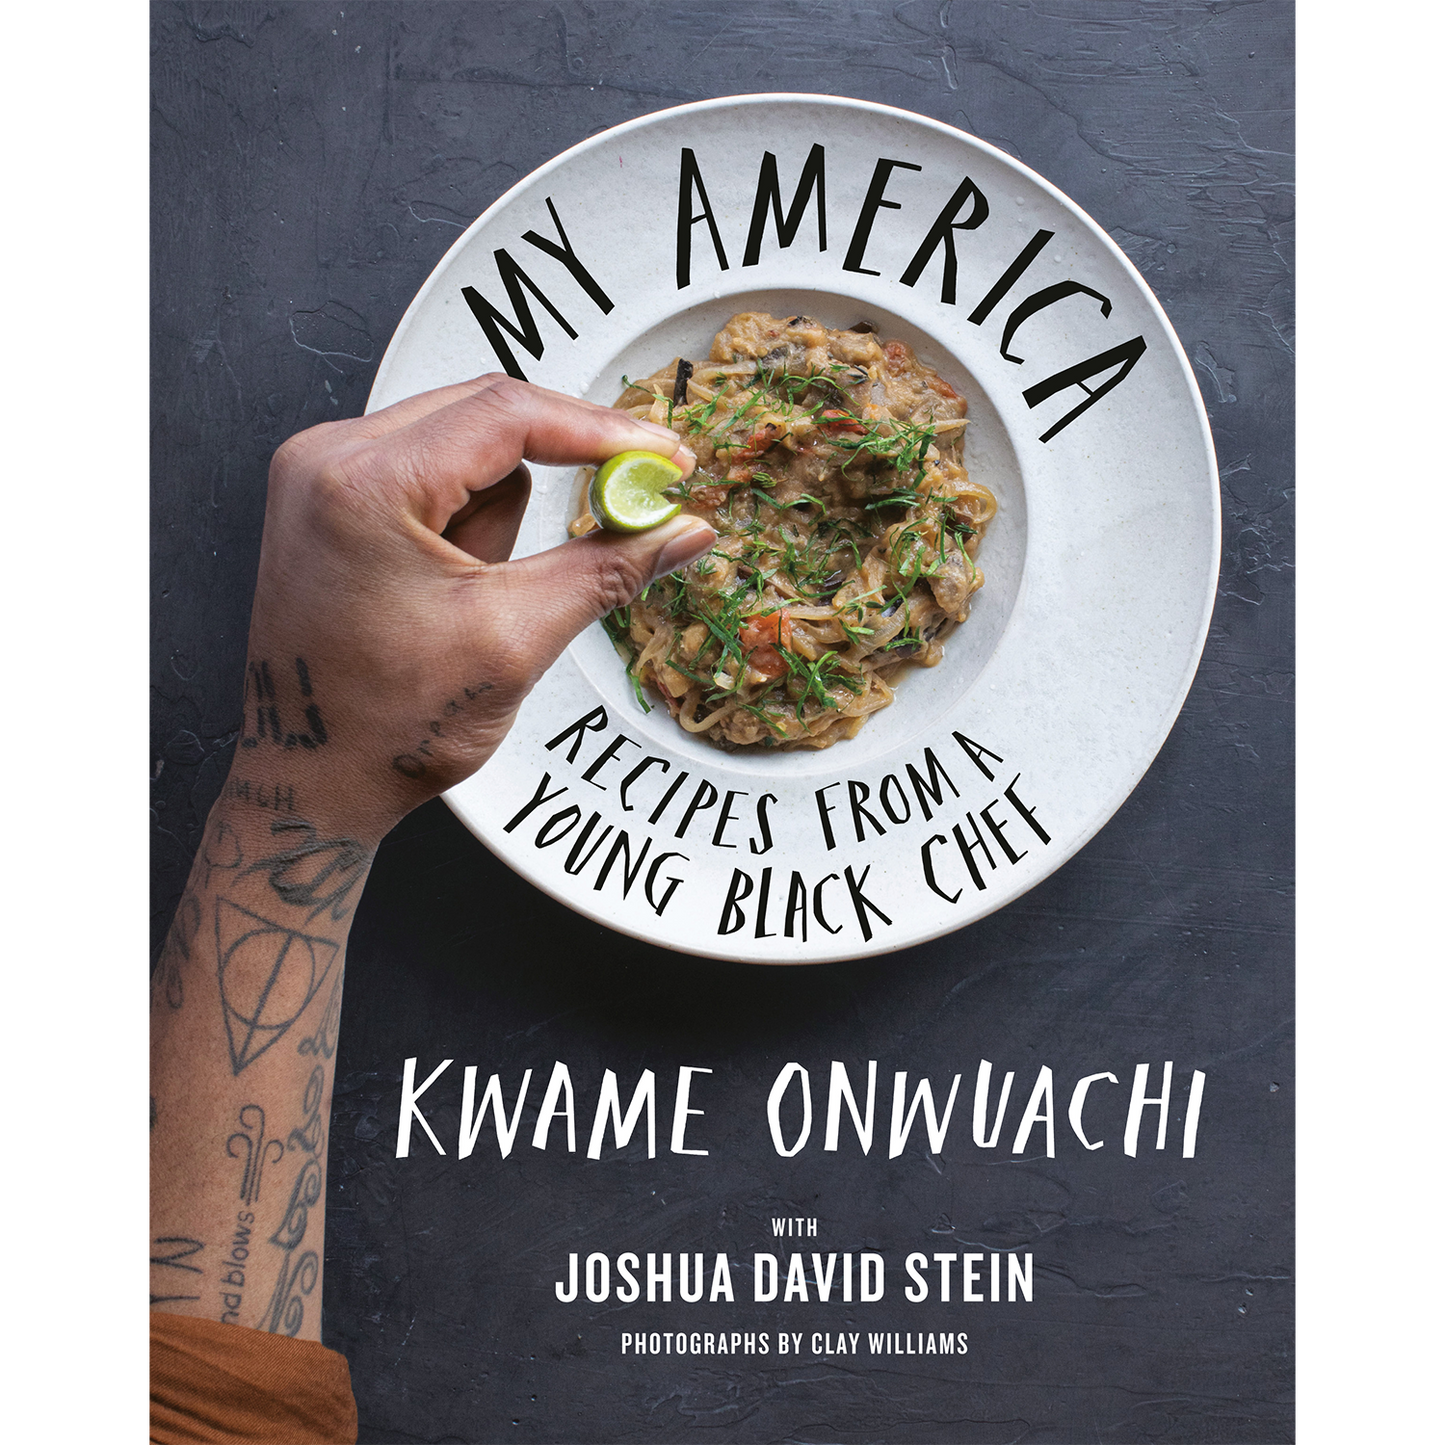 MY AMERICA: Recipes from a Young Black Chef